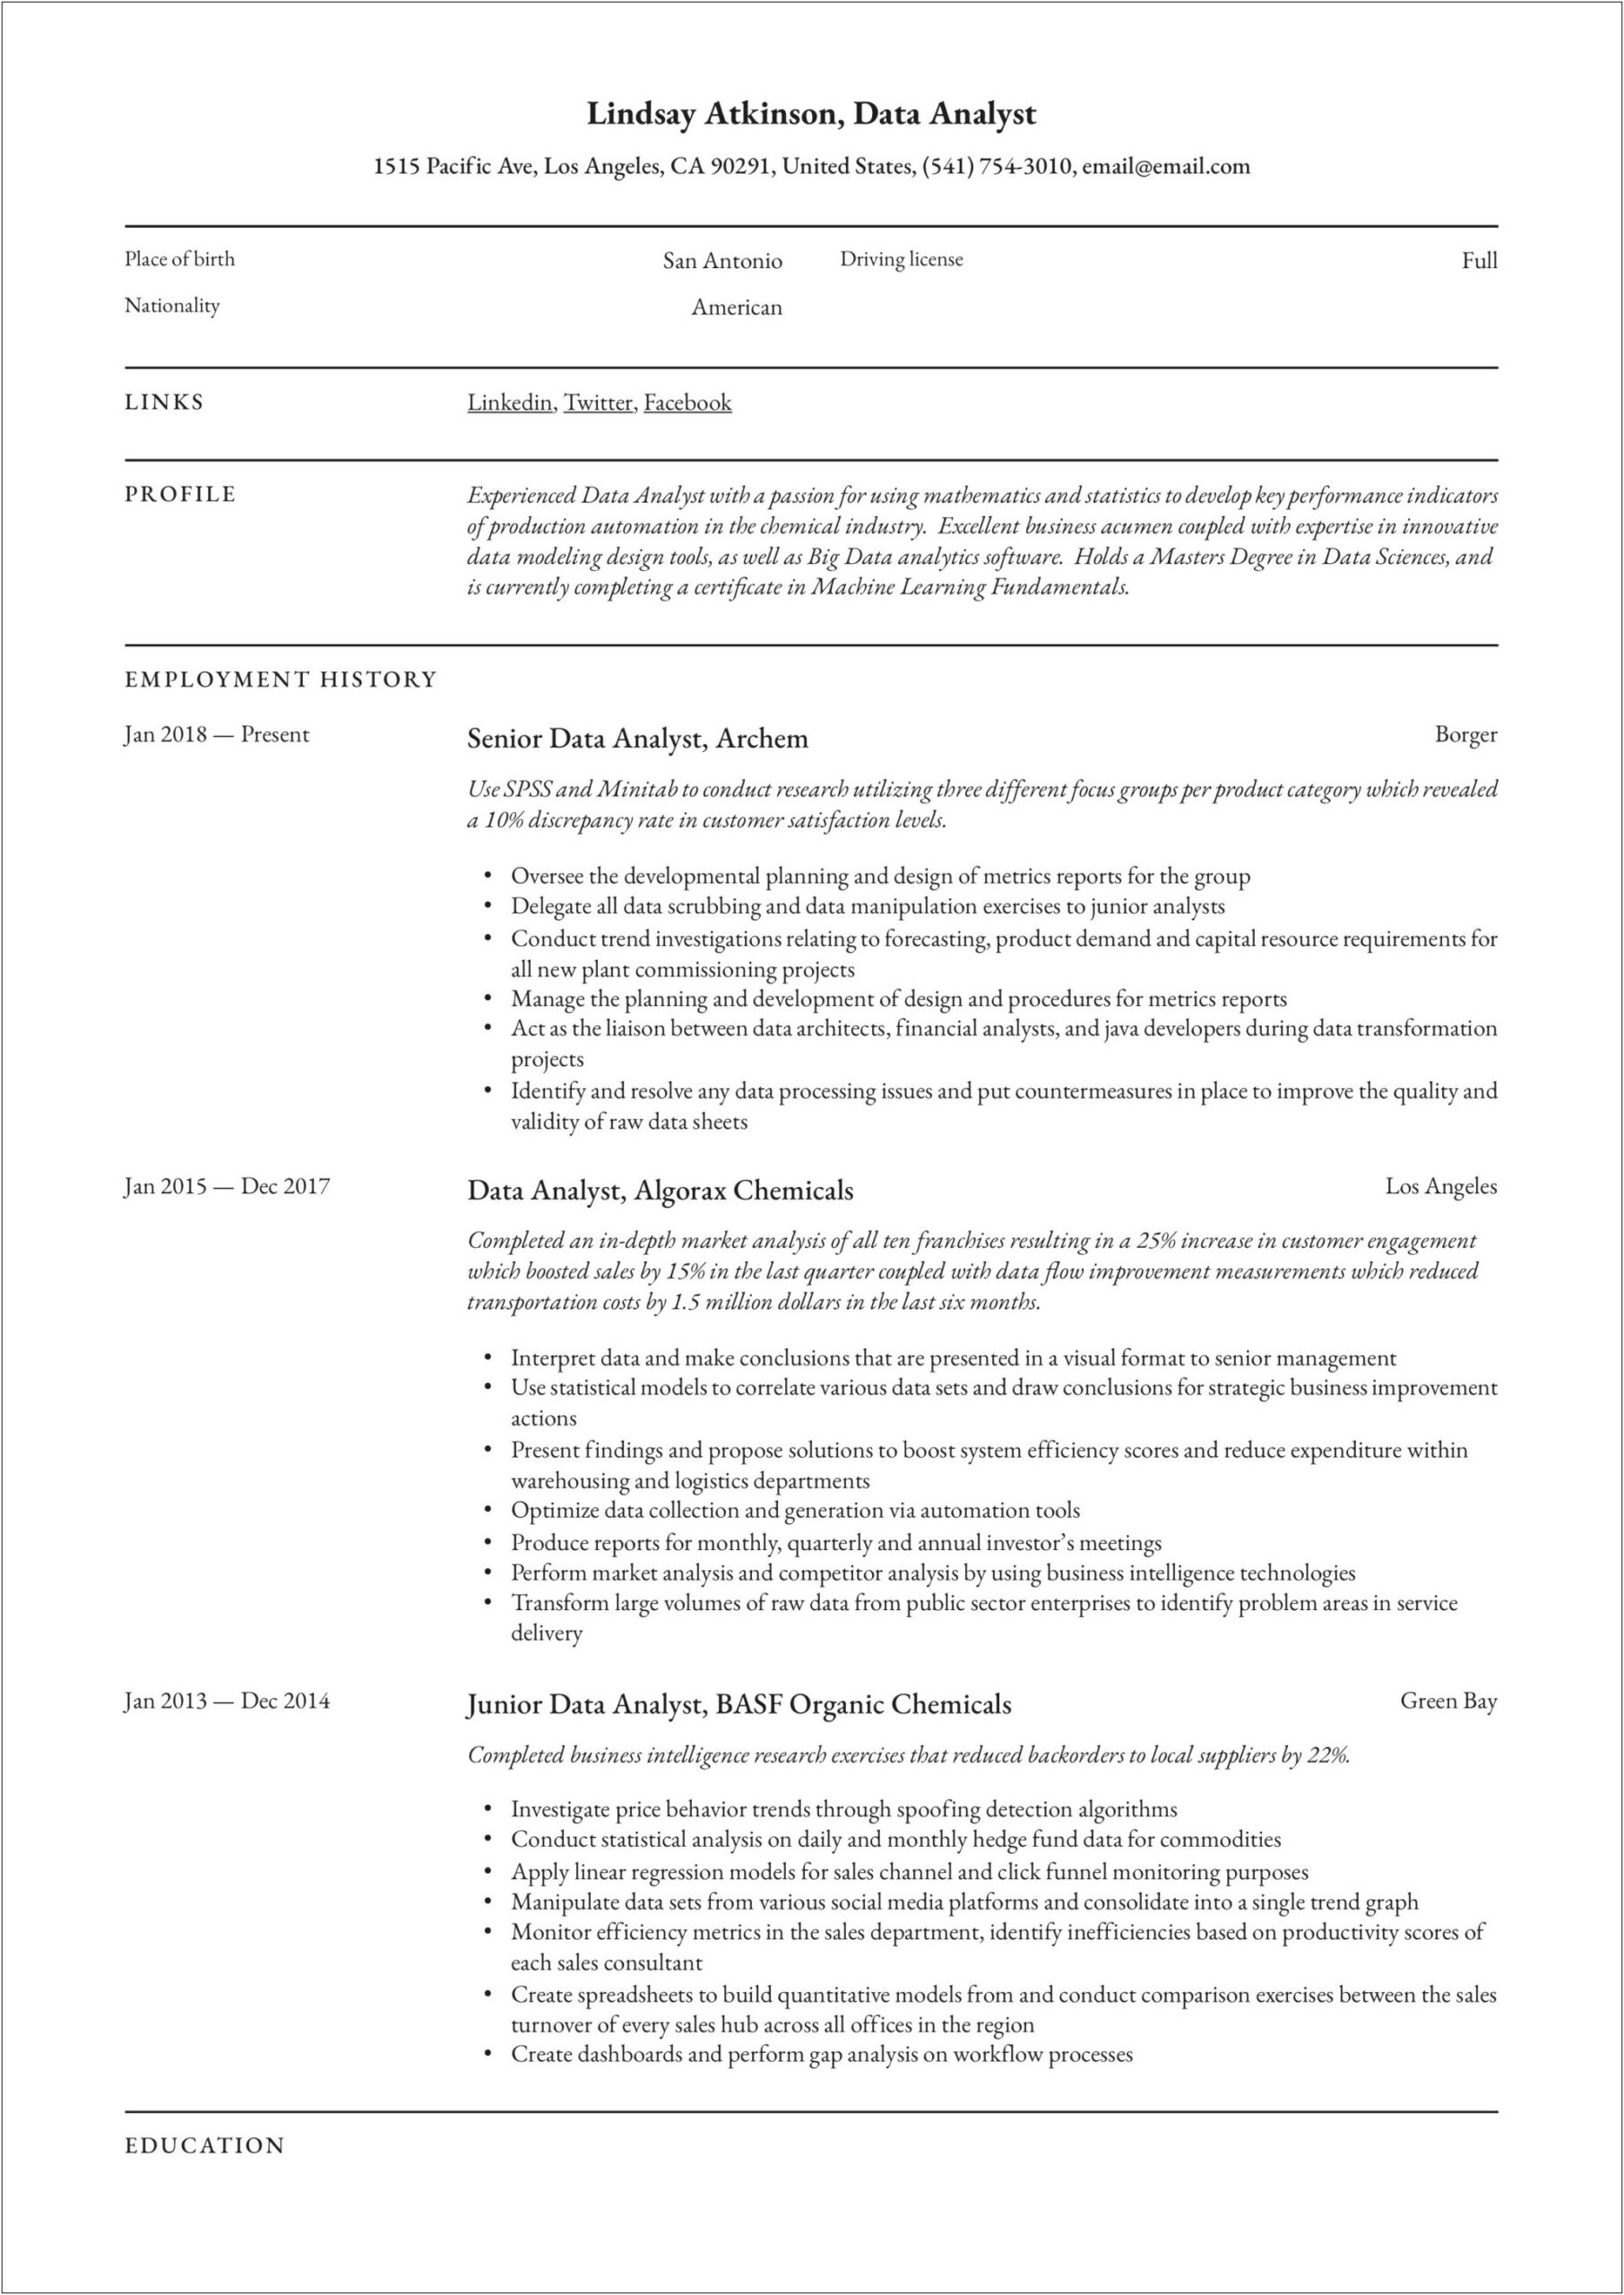 Examples Of Good Resumes For Data Analysts